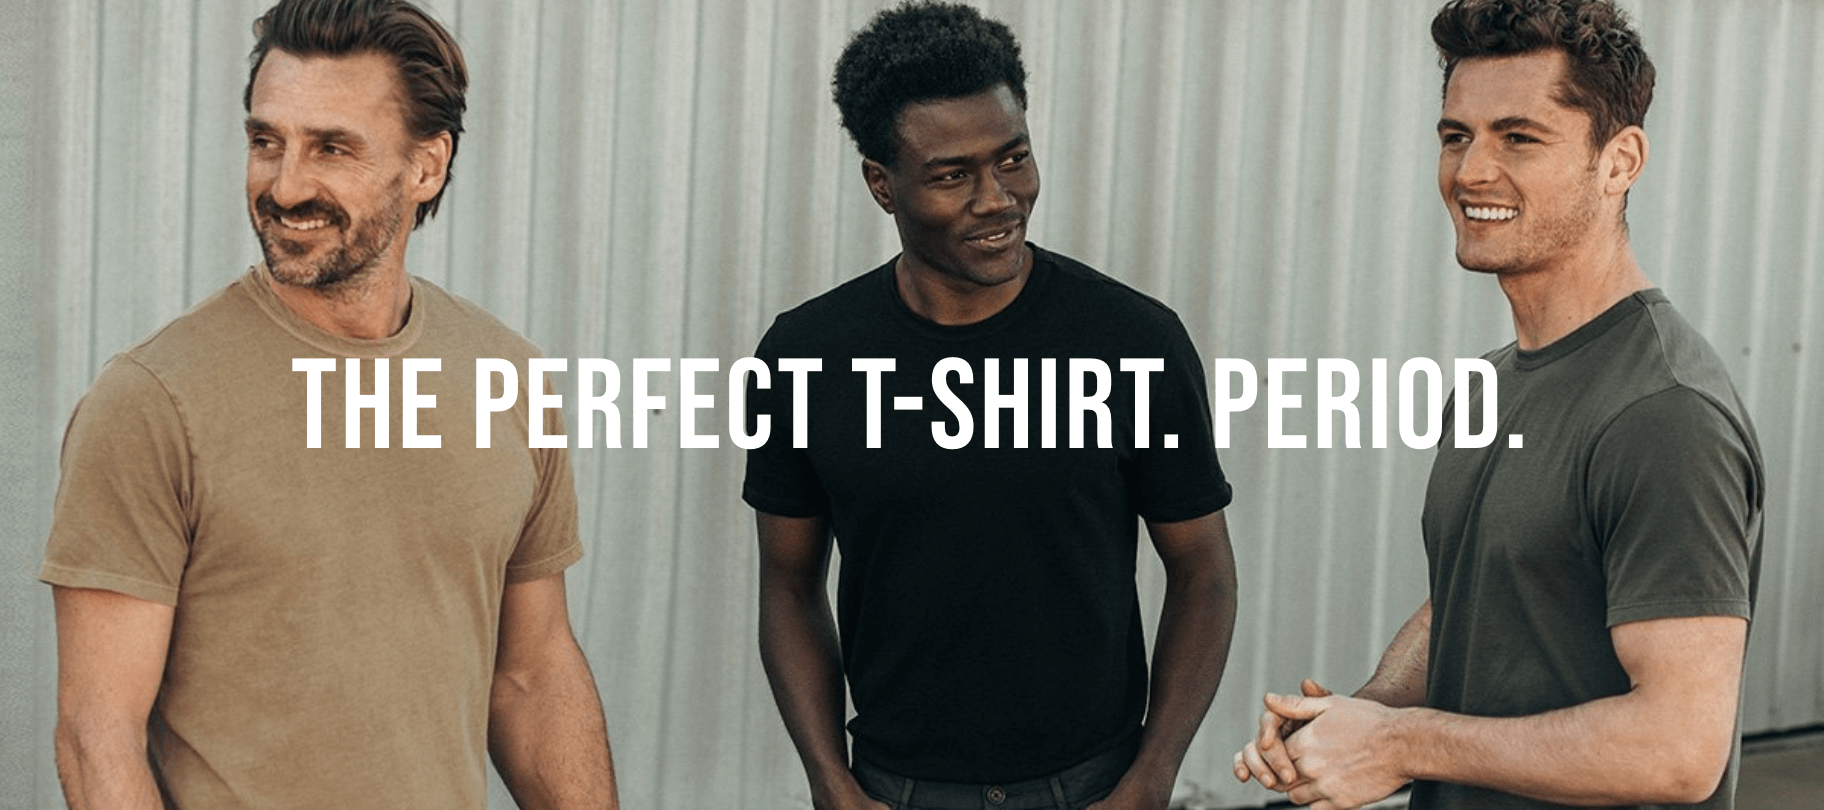 Buck Mason's t-shirts have a simple value proposition: the perfect t-shirt. Period. 